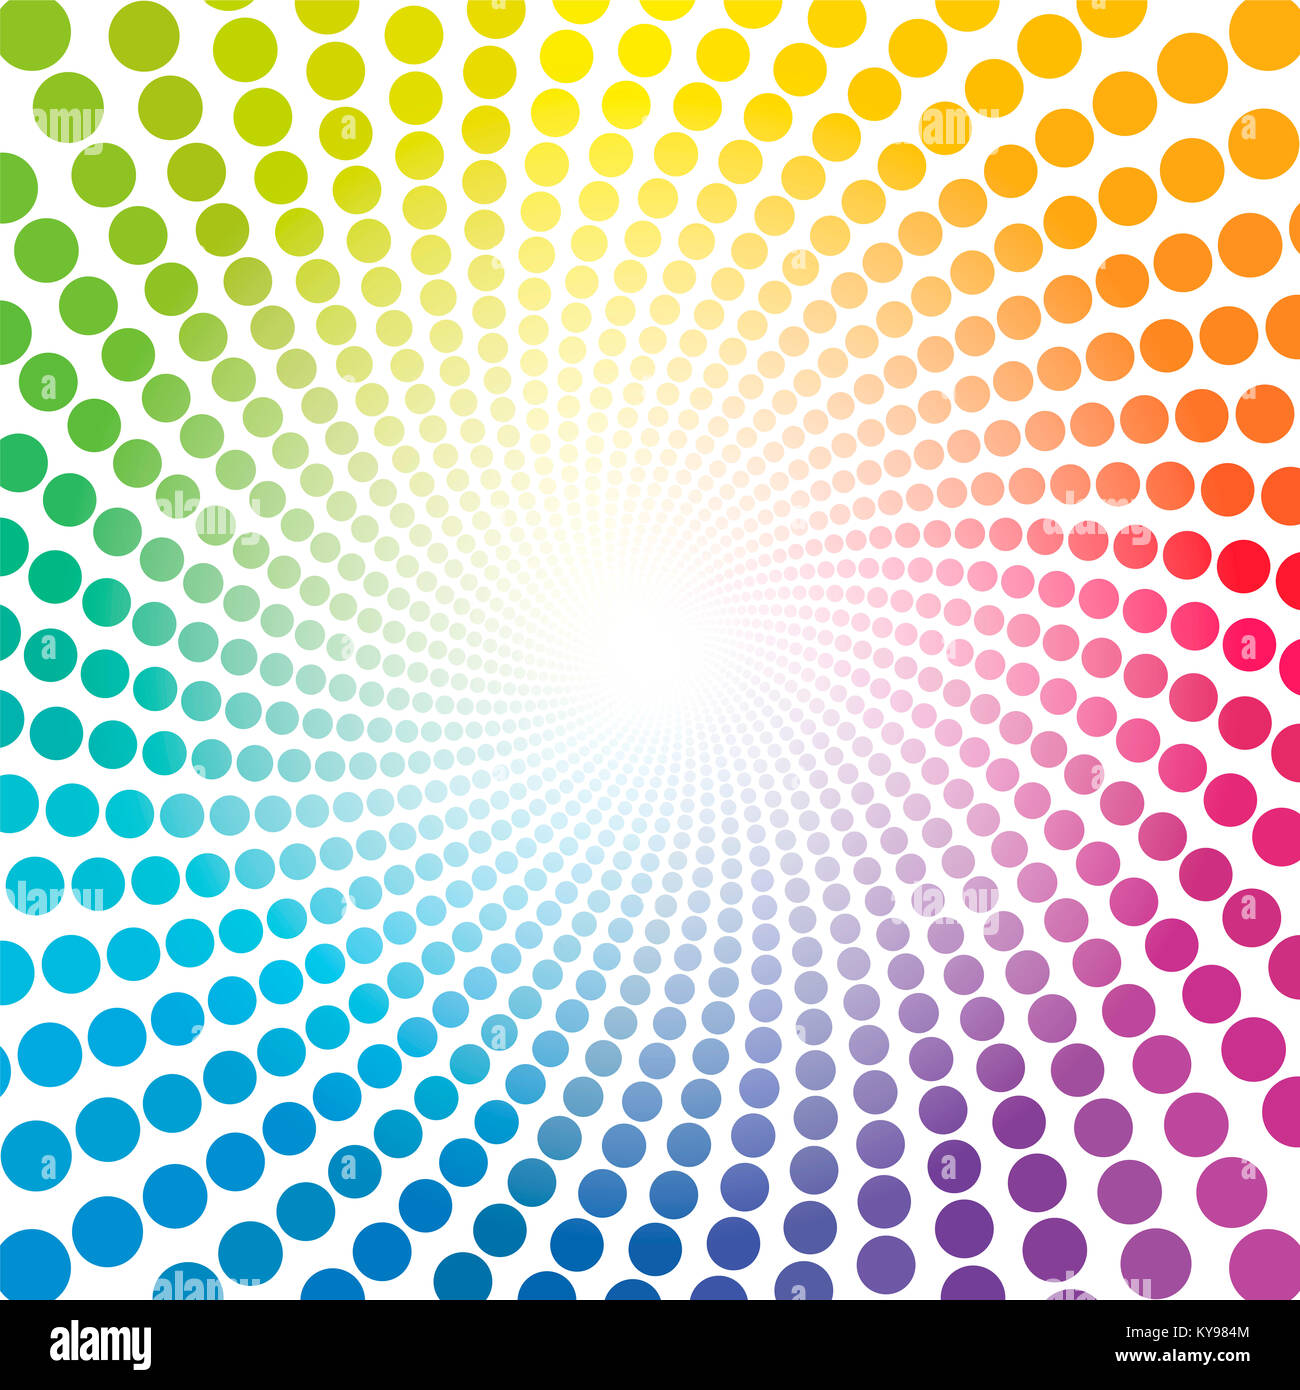 Spiral pattern - rainbow colored tunnel with light center - twisted circular background illustration, hypnotic and psychedelic. Stock Photo